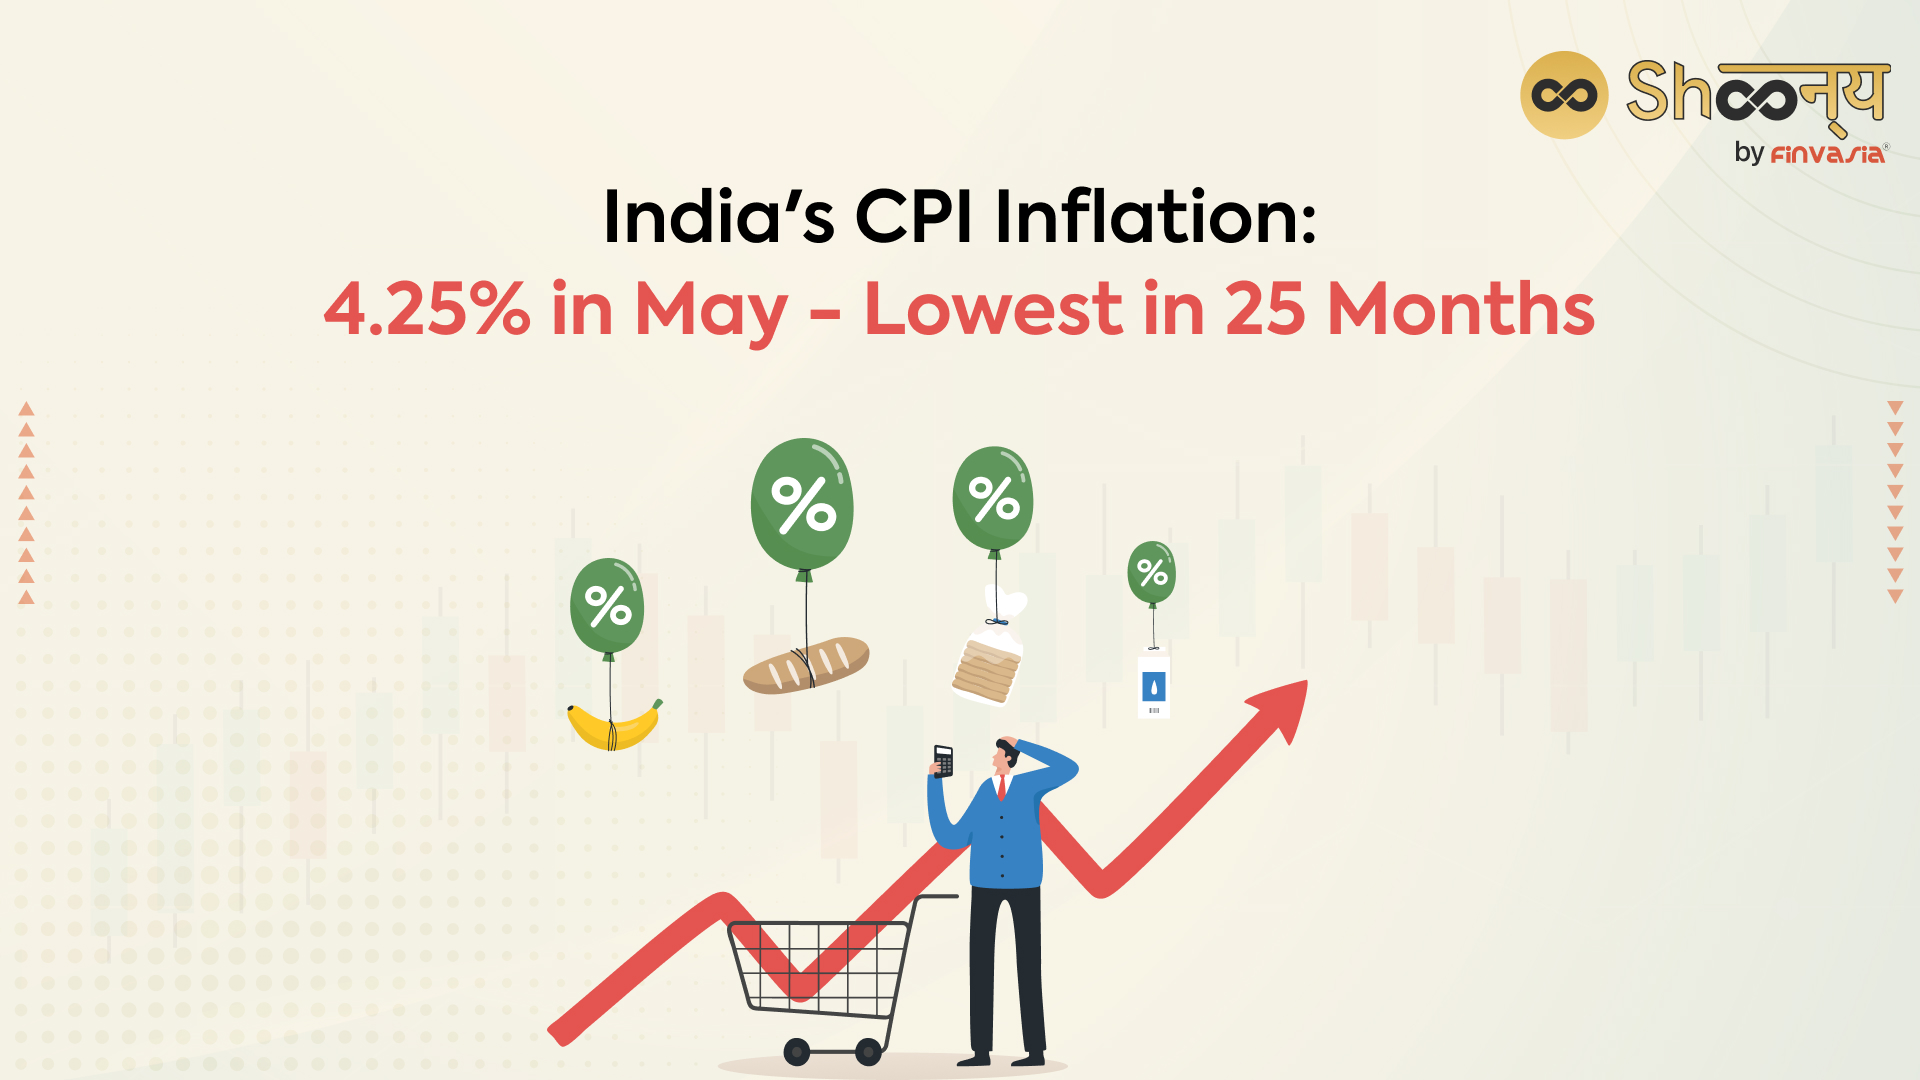 India's CPI Inflation 4.25 in May Lowest in 25 Months